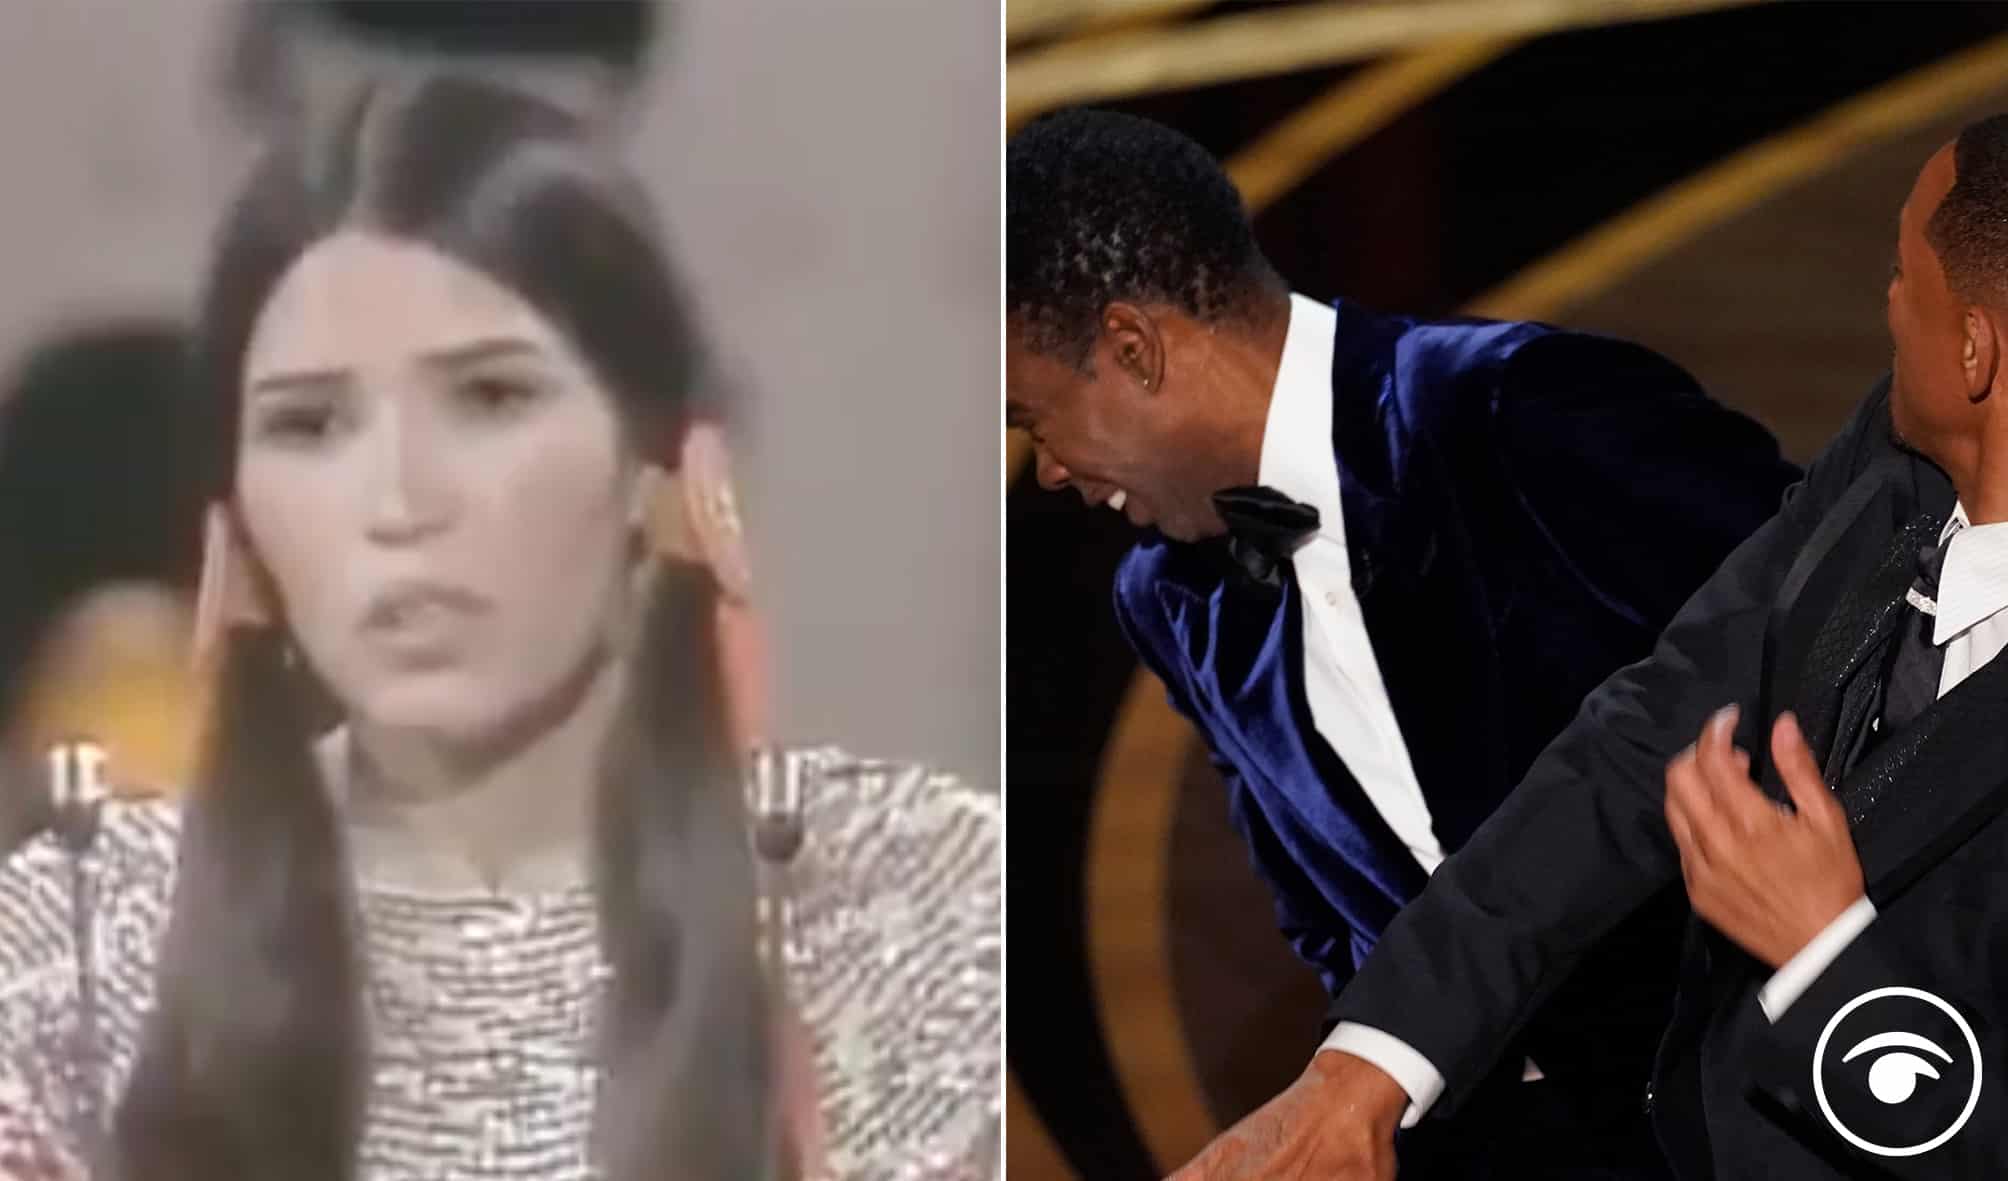 Watch: Was Will Smith worst Oscar’s moment? John Wayne tried to assault Native American woman in 1973